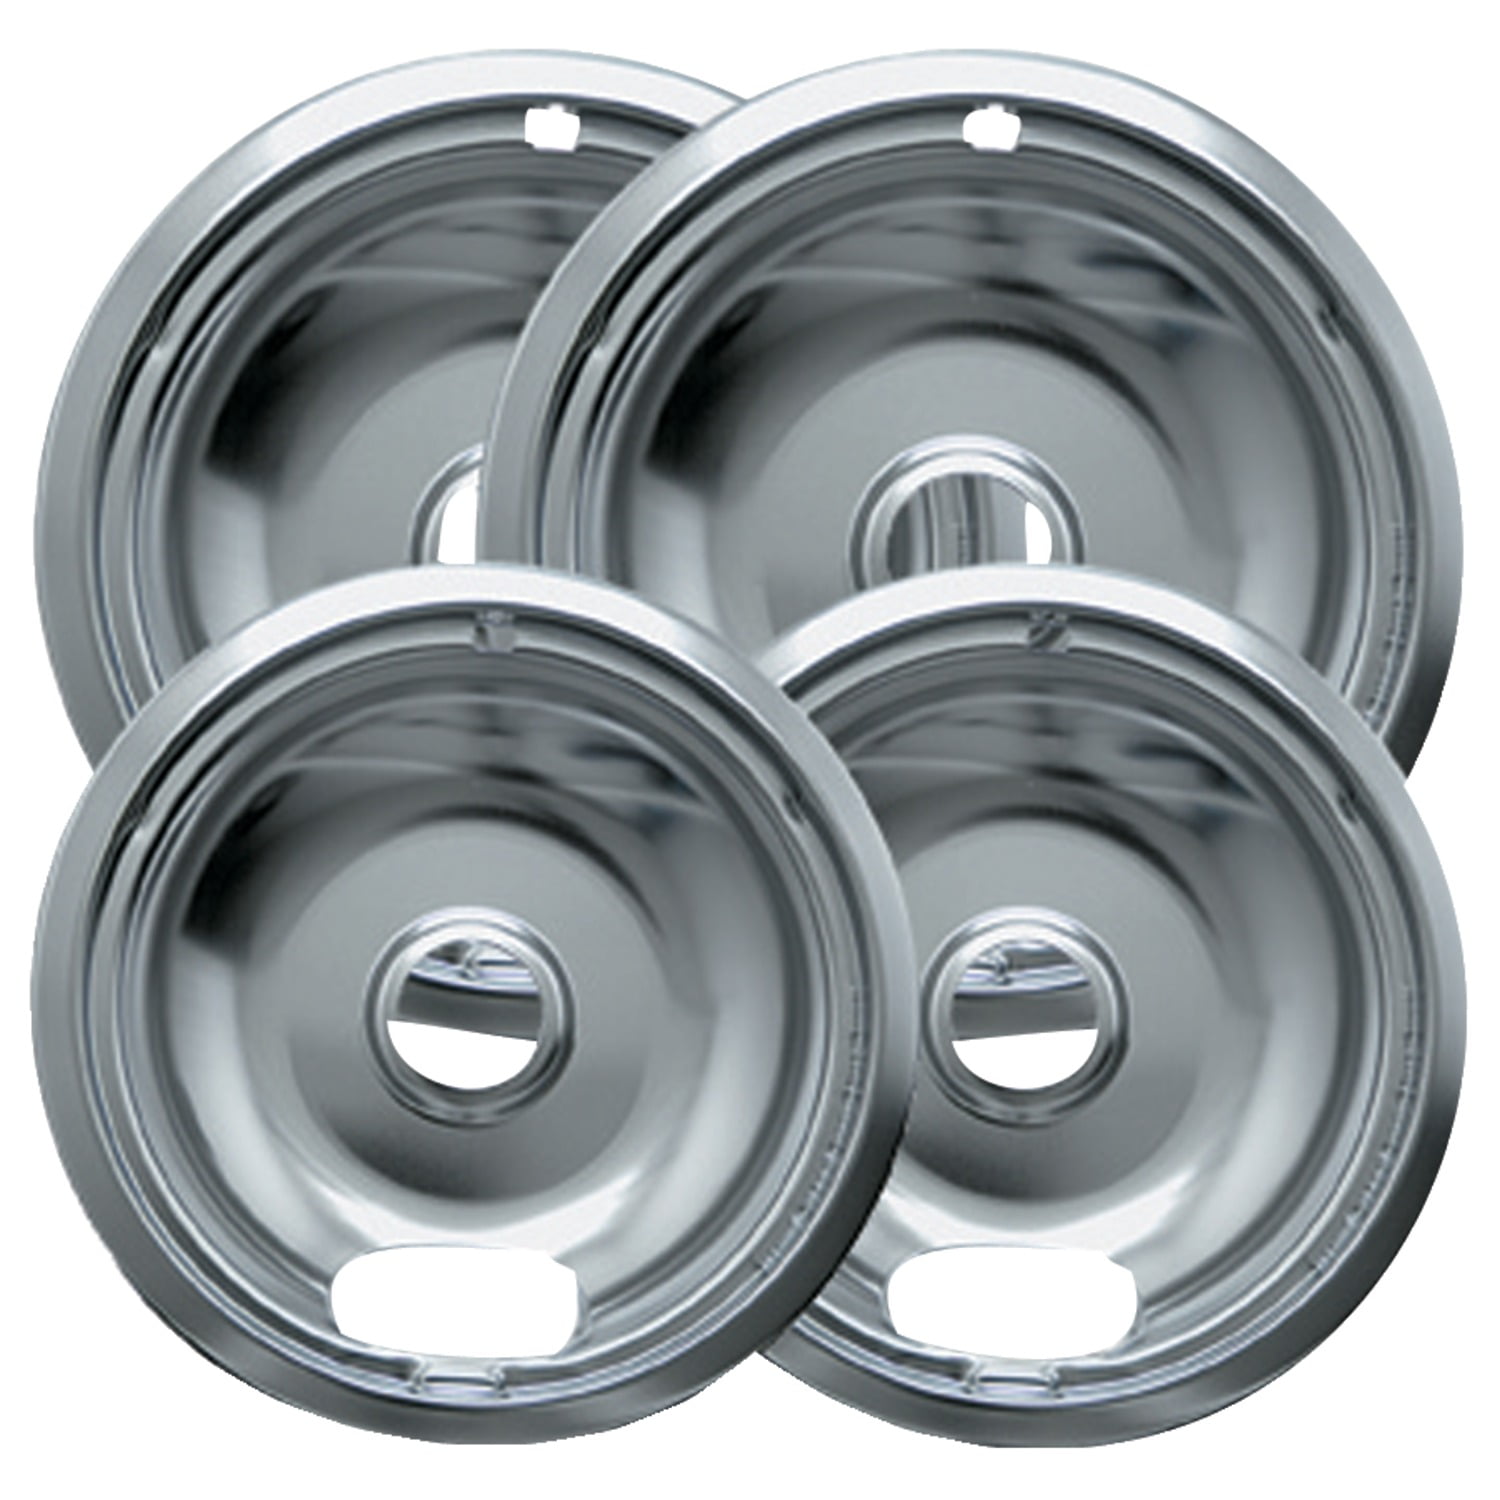 2 8" Stove Drip Pans Replacement Set for Whirlpool Chrome 2 6" and 